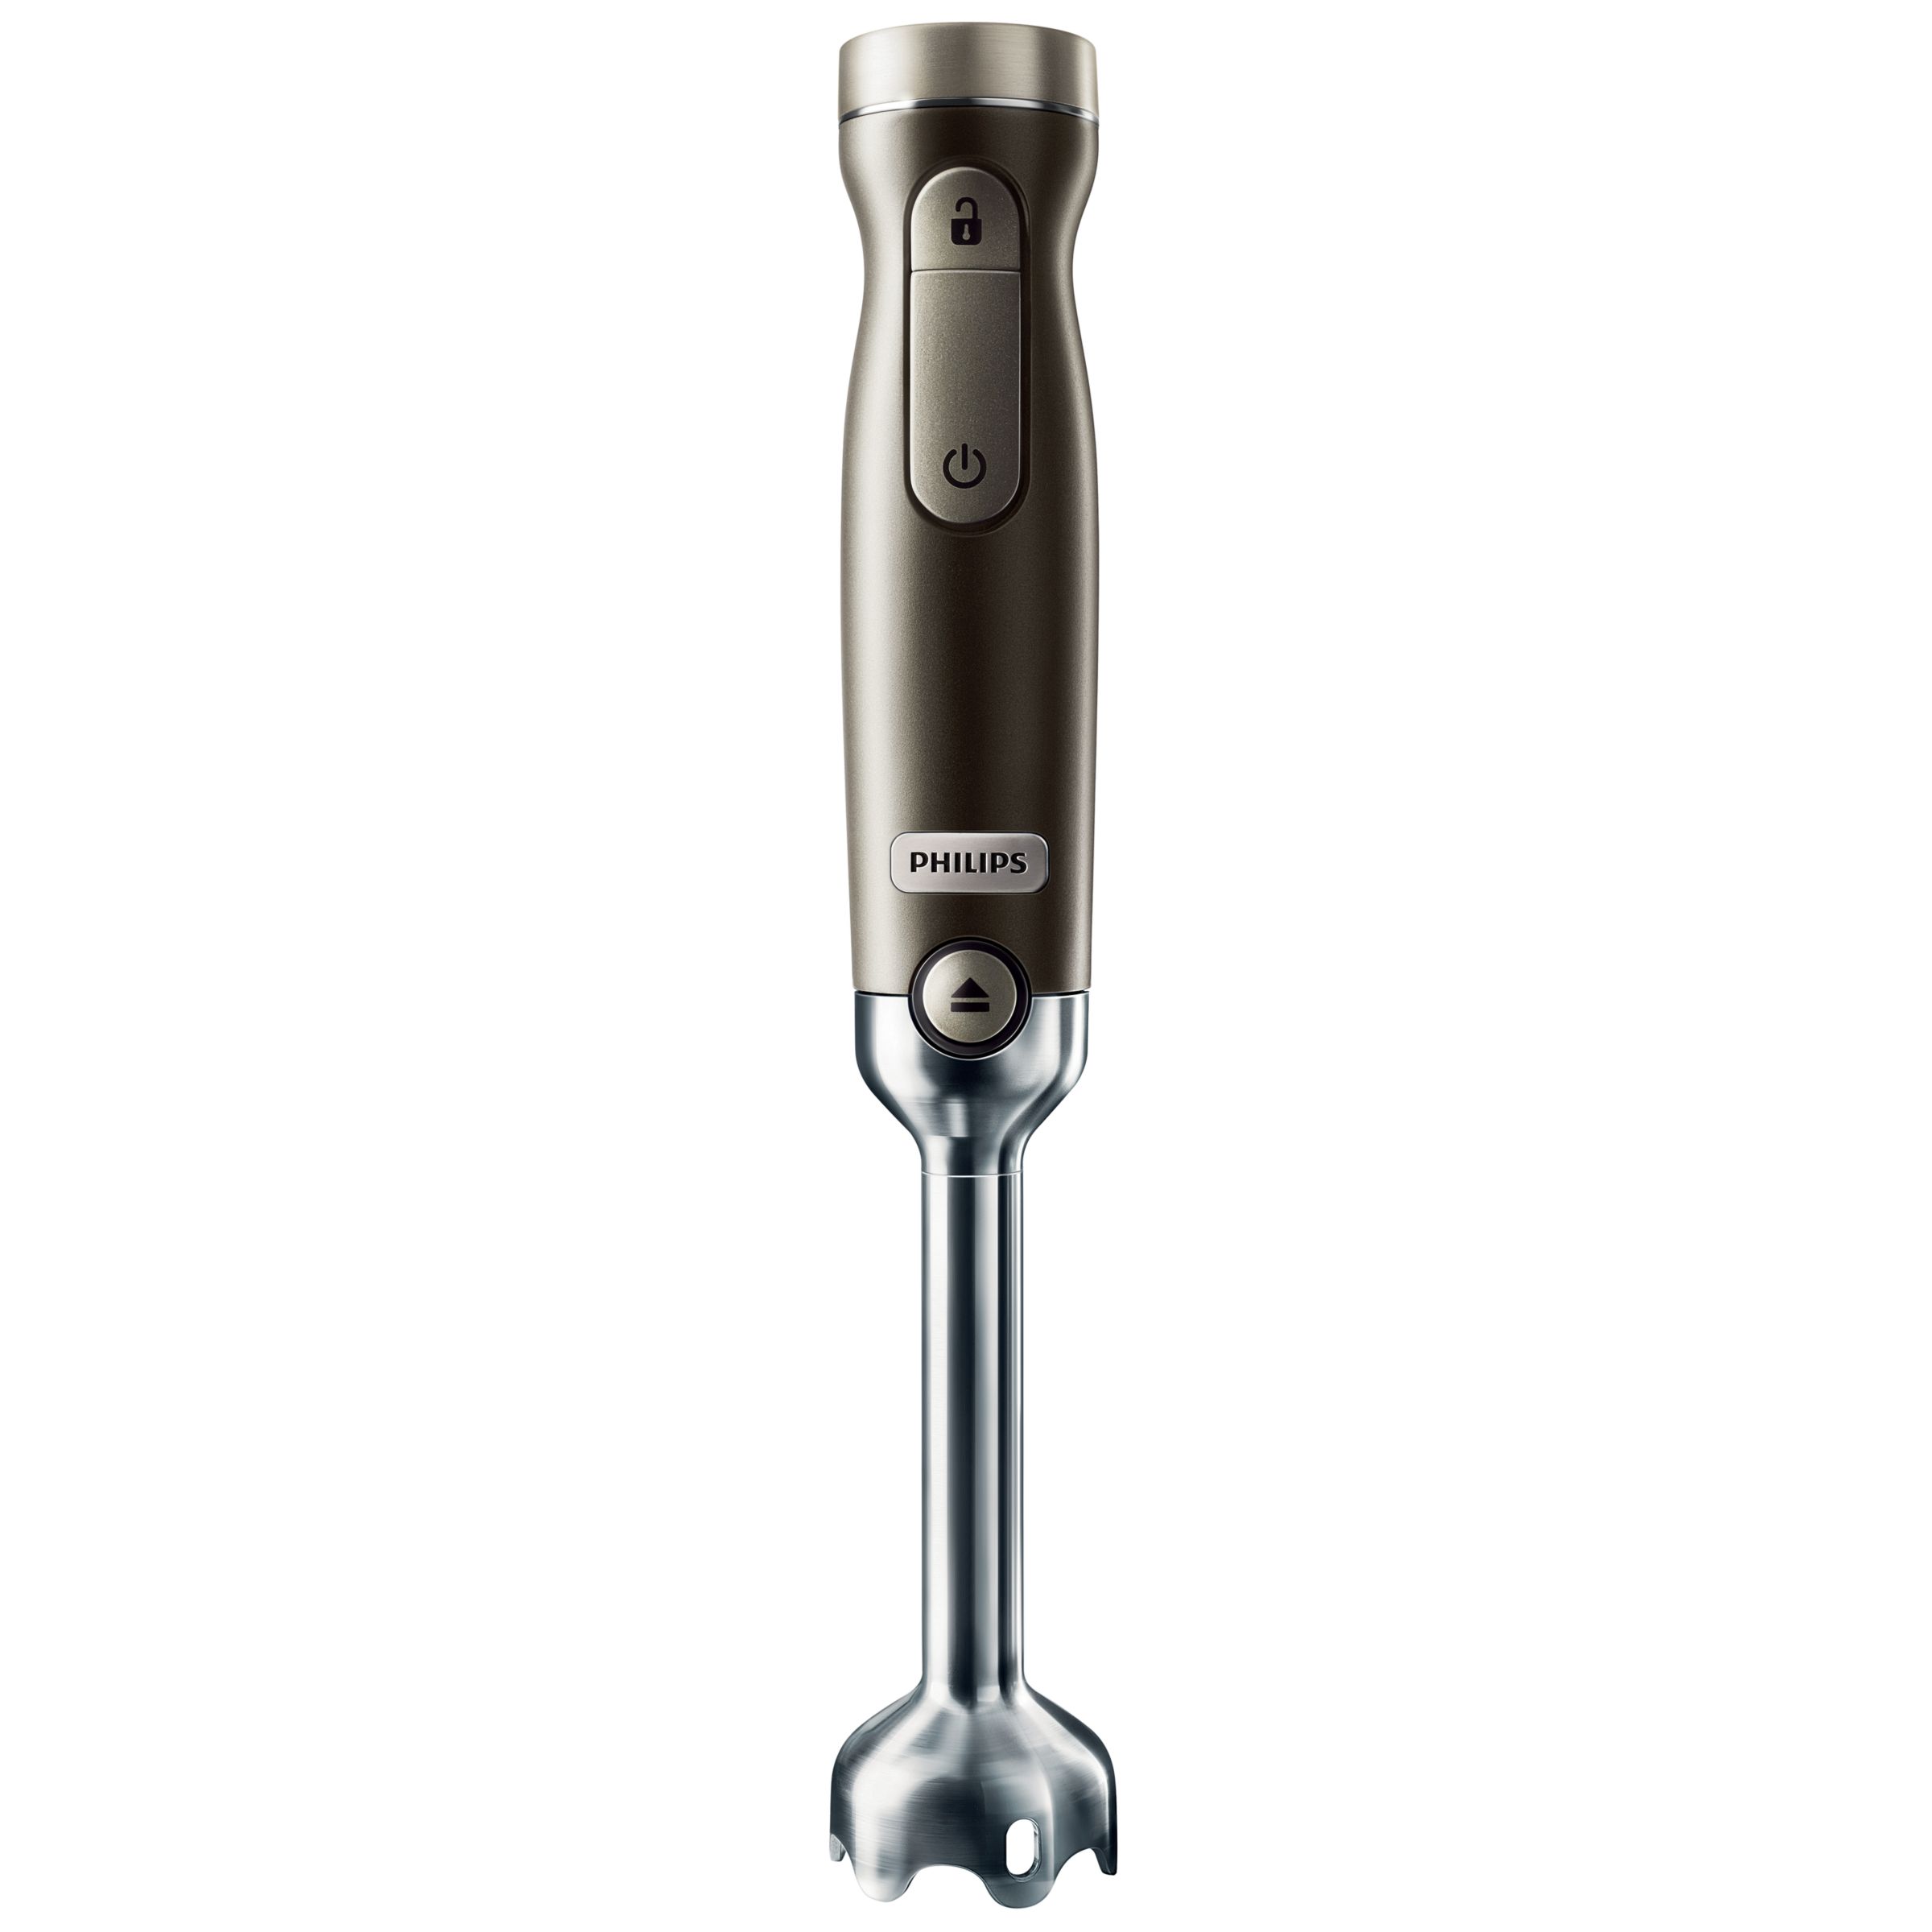 Philips HR1379 Robust Rechargeable Stick Blender at JohnLewis